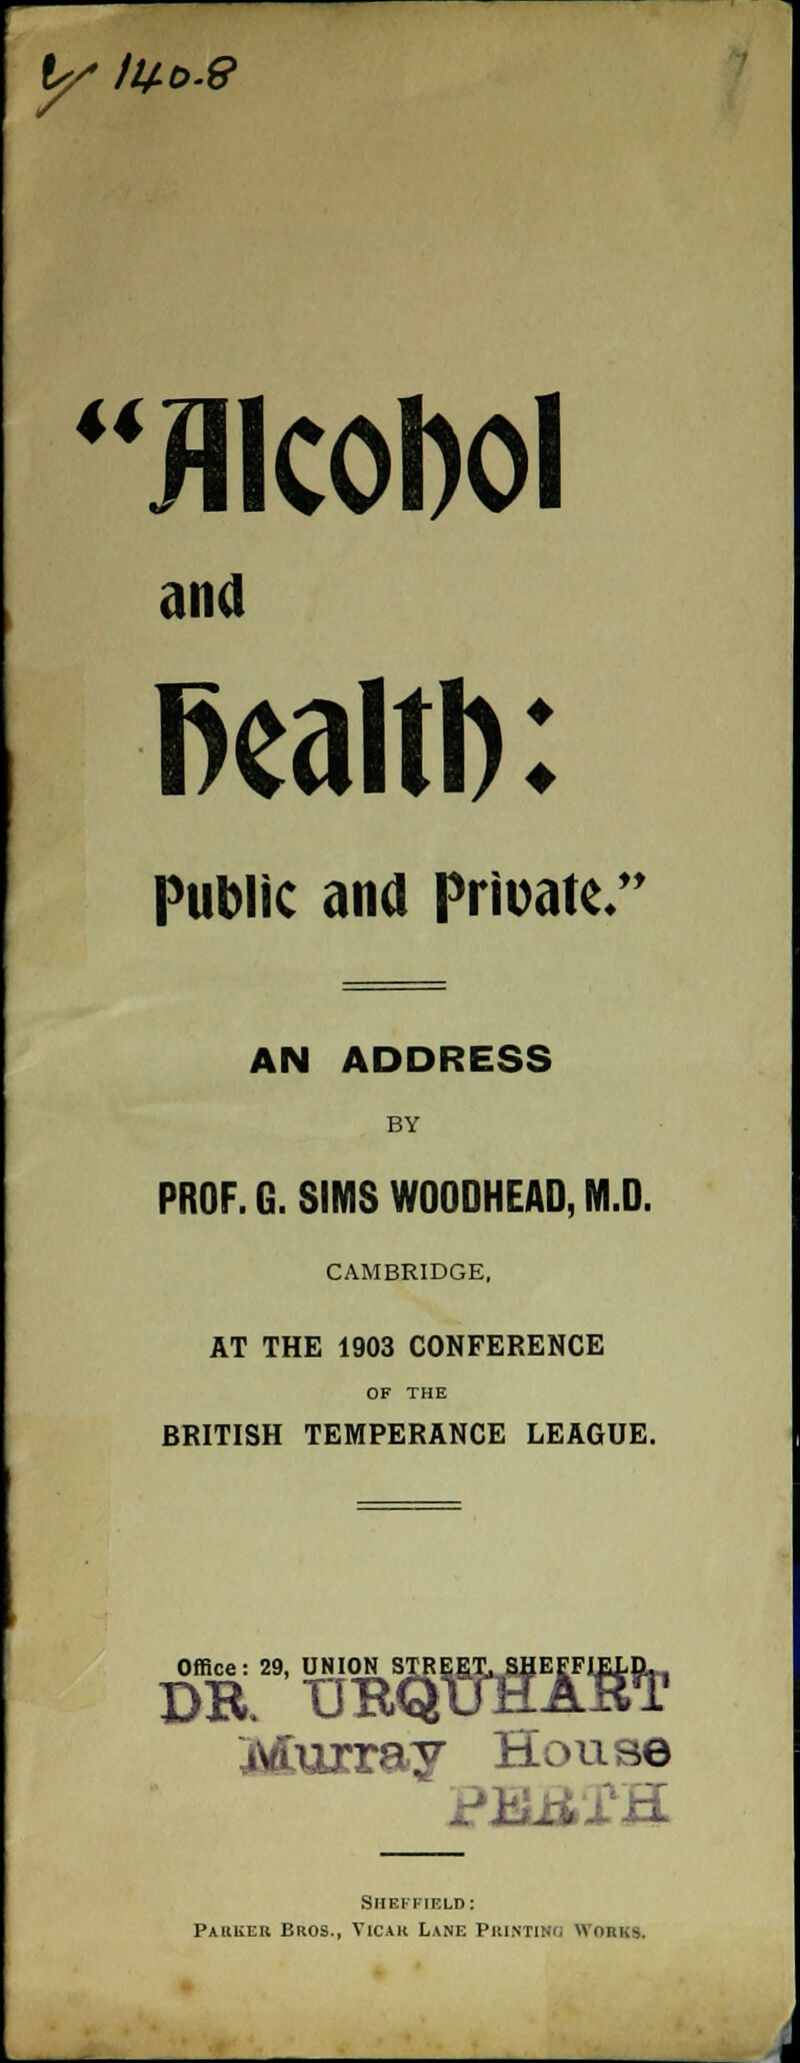 y ii+ t>.9 u Alcohol and fiealtb: Public ana Private/* AN ADDRESS BY PROF. G. SIMS WOODHEAD, M.D. CAMBRIDGE, AT THE 1903 CONFERENCE OF THE BRITISH TEMPERANCE LEAGUE. Office: 29, UNION STREET. SHEFFIELD DR UBQuHAkT Murray House Sheffield: Paiiuek Bros., Vicak Lane Printing Works,